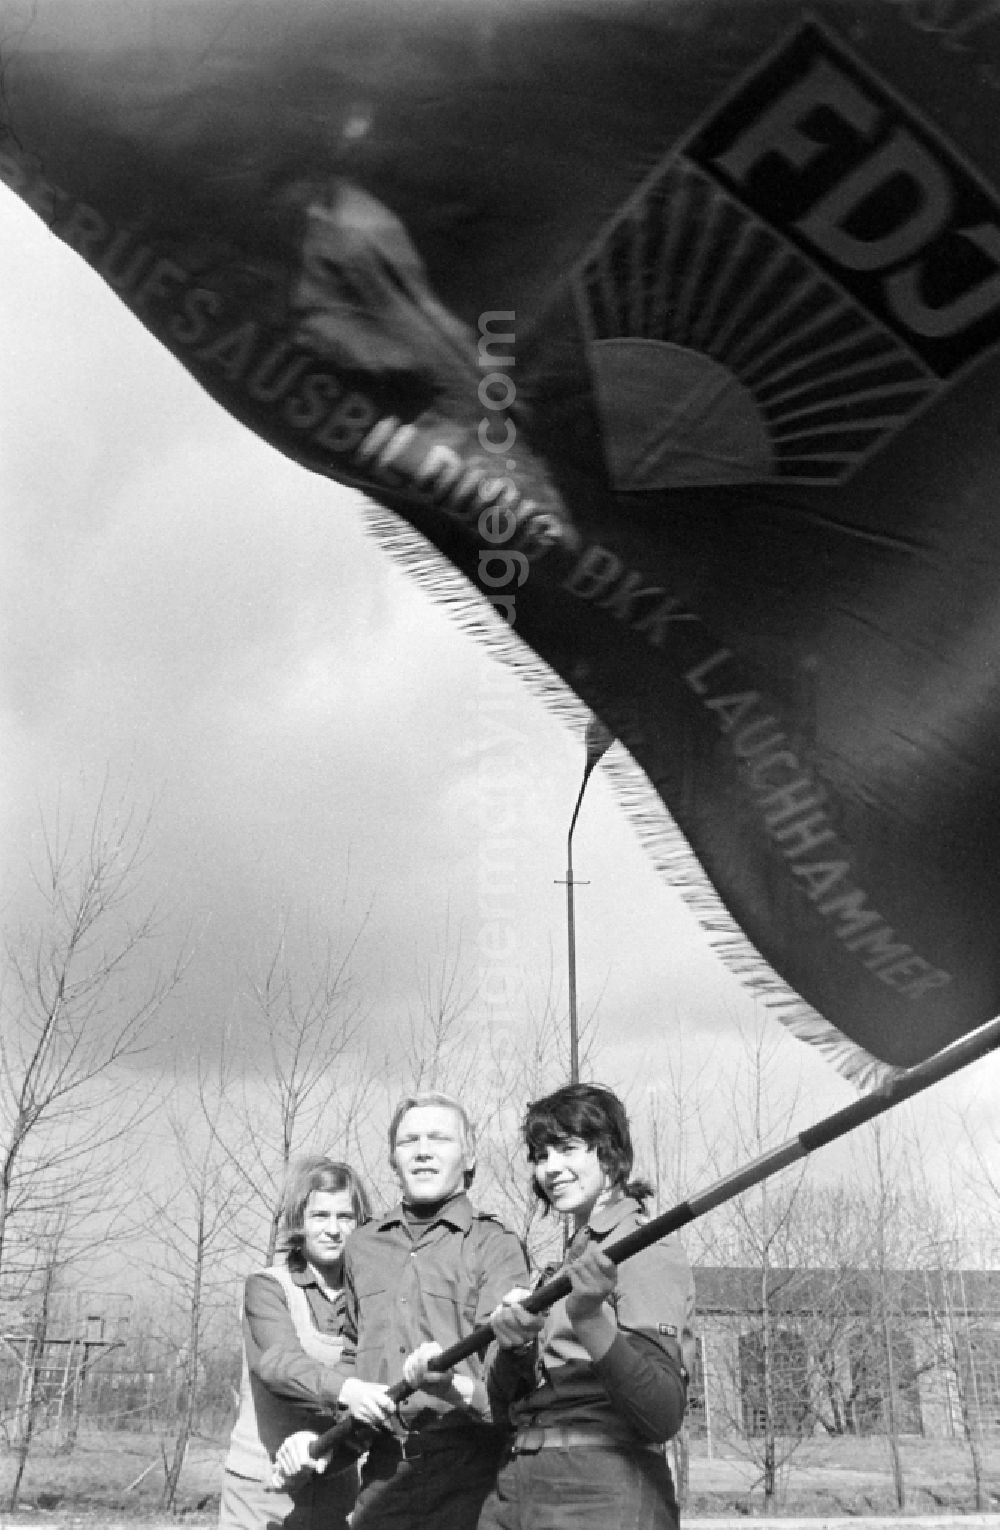 GDR photo archive: Lauchhammer - Members of the school of the Braunkohle Kombinat Lauchhammer wave an FDJ flag in Lauchhammer in the federal state of Brandenburg on the territory of the former GDR, German Democratic Republic